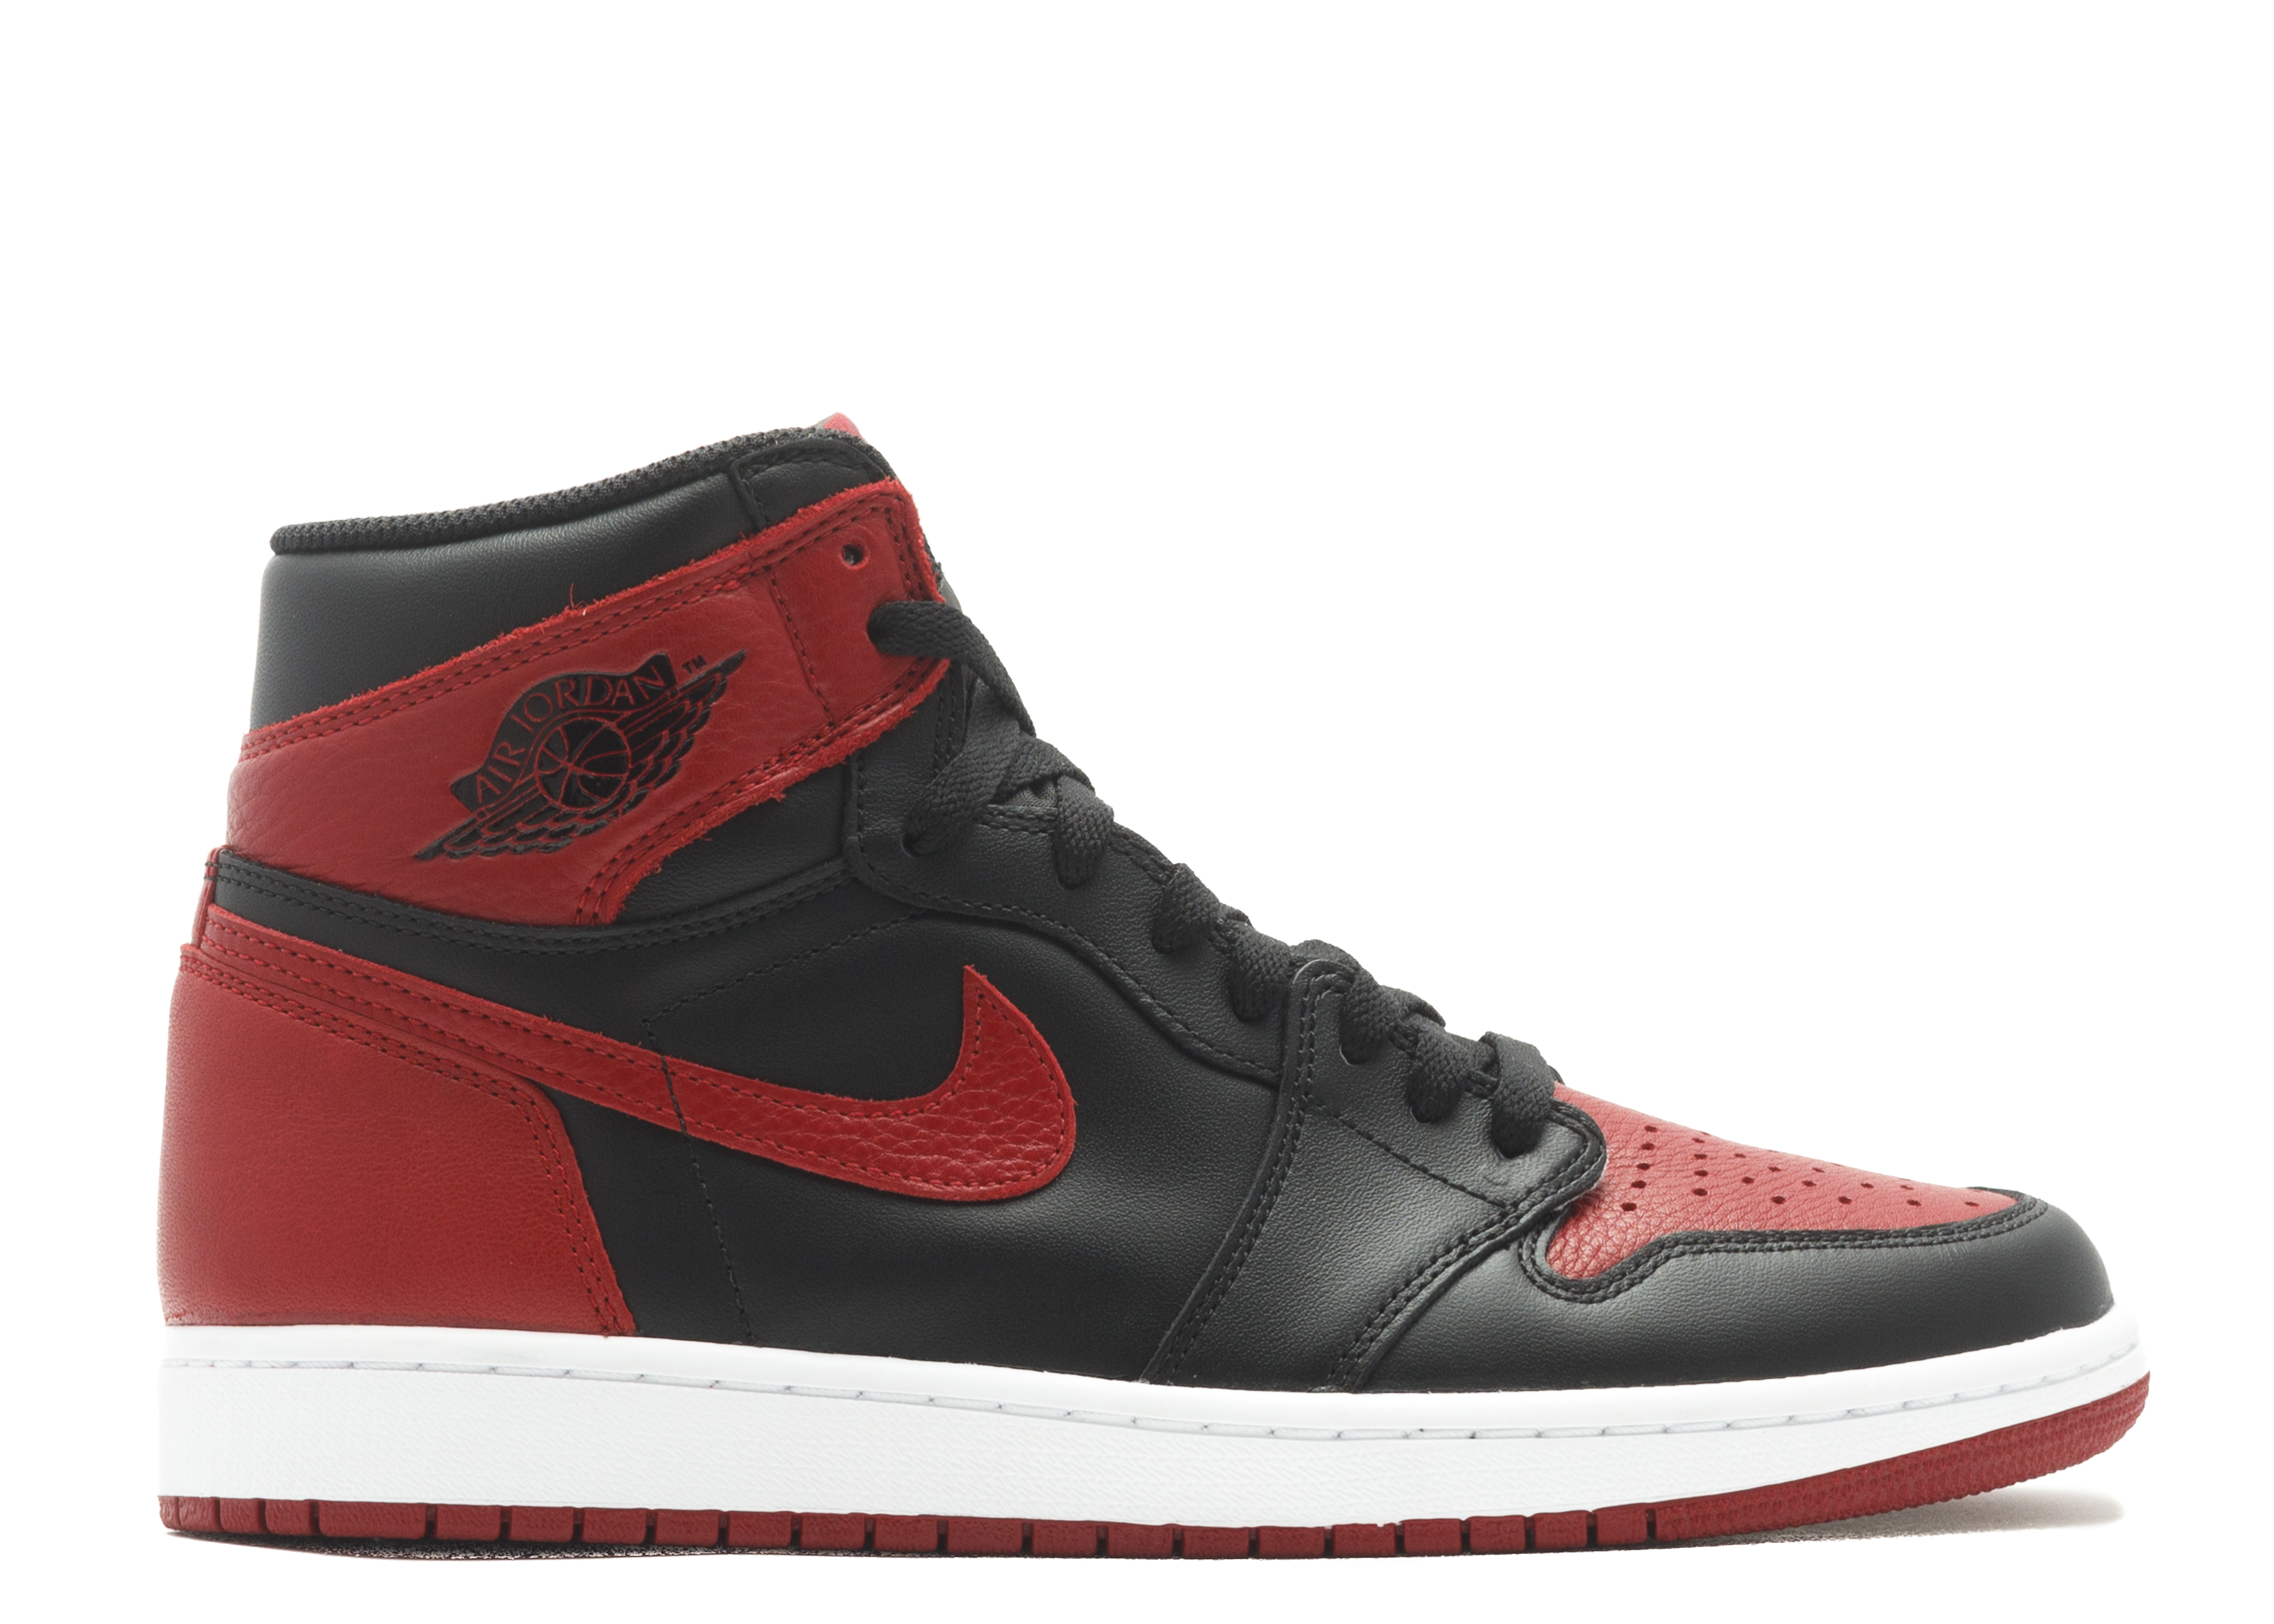 Nike air jordan 1 – shoes are coming in timeless colors! – fashionarrow.com